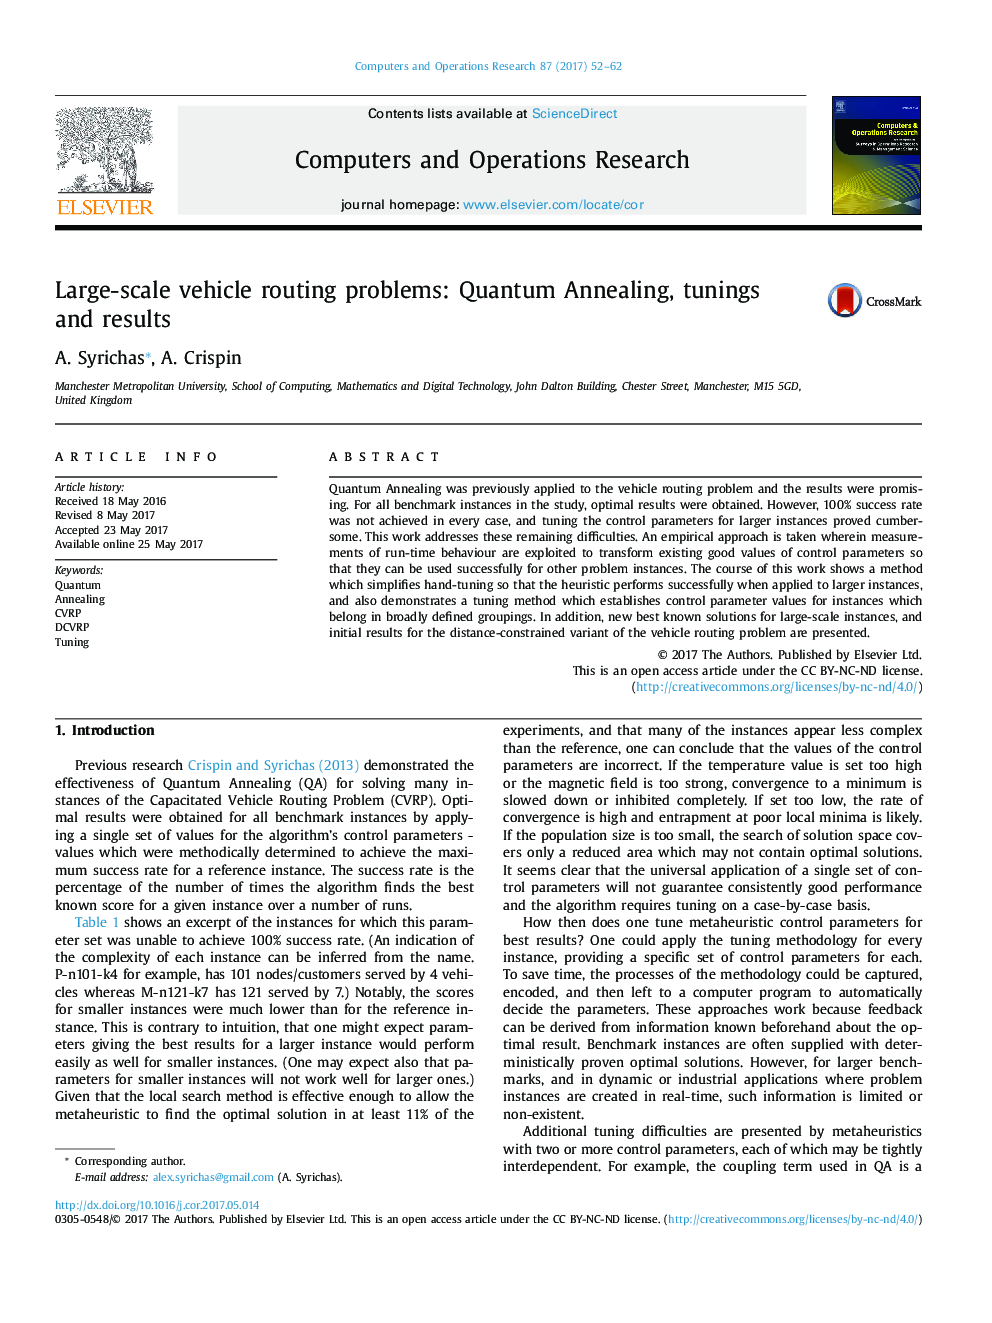 Large-scale vehicle routing problems: Quantum Annealing, tunings and results